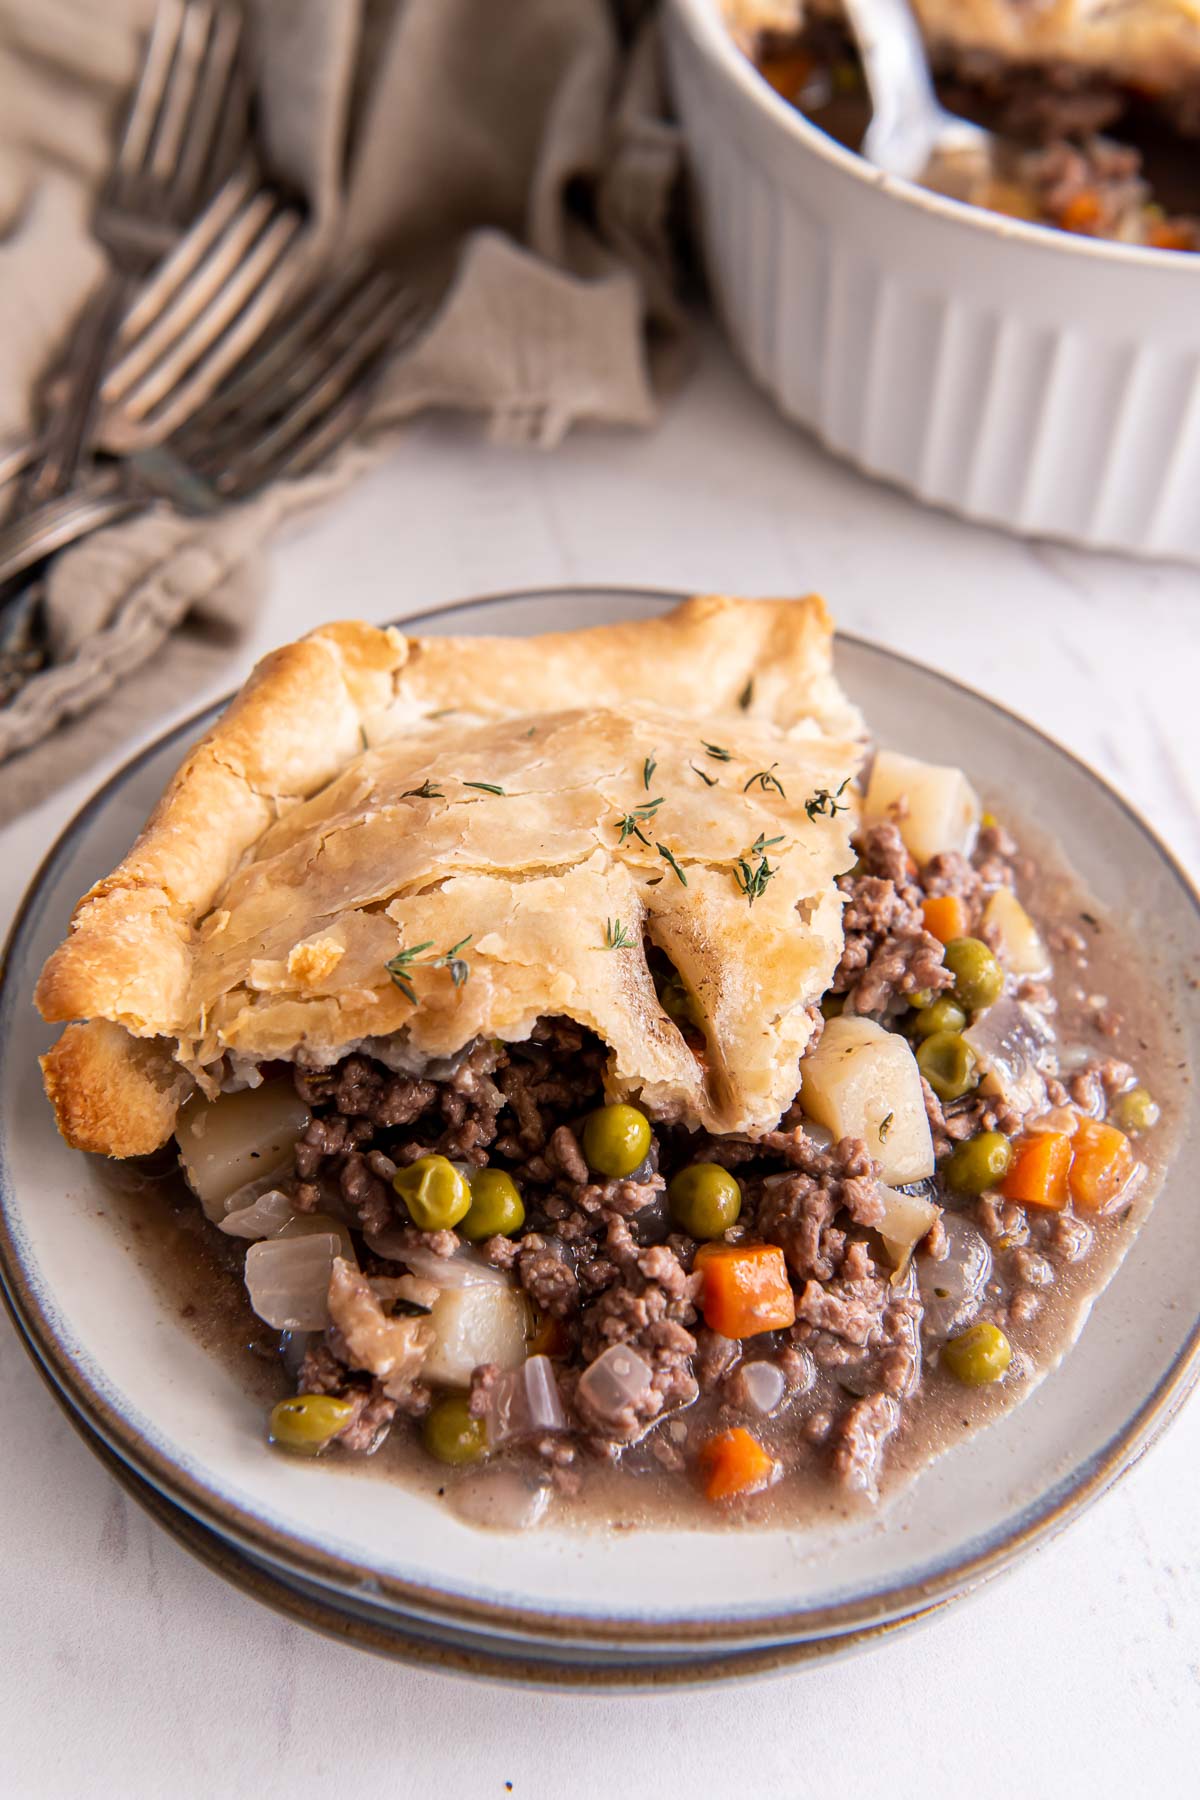 Scoop of ground beef pot pie on a plate.